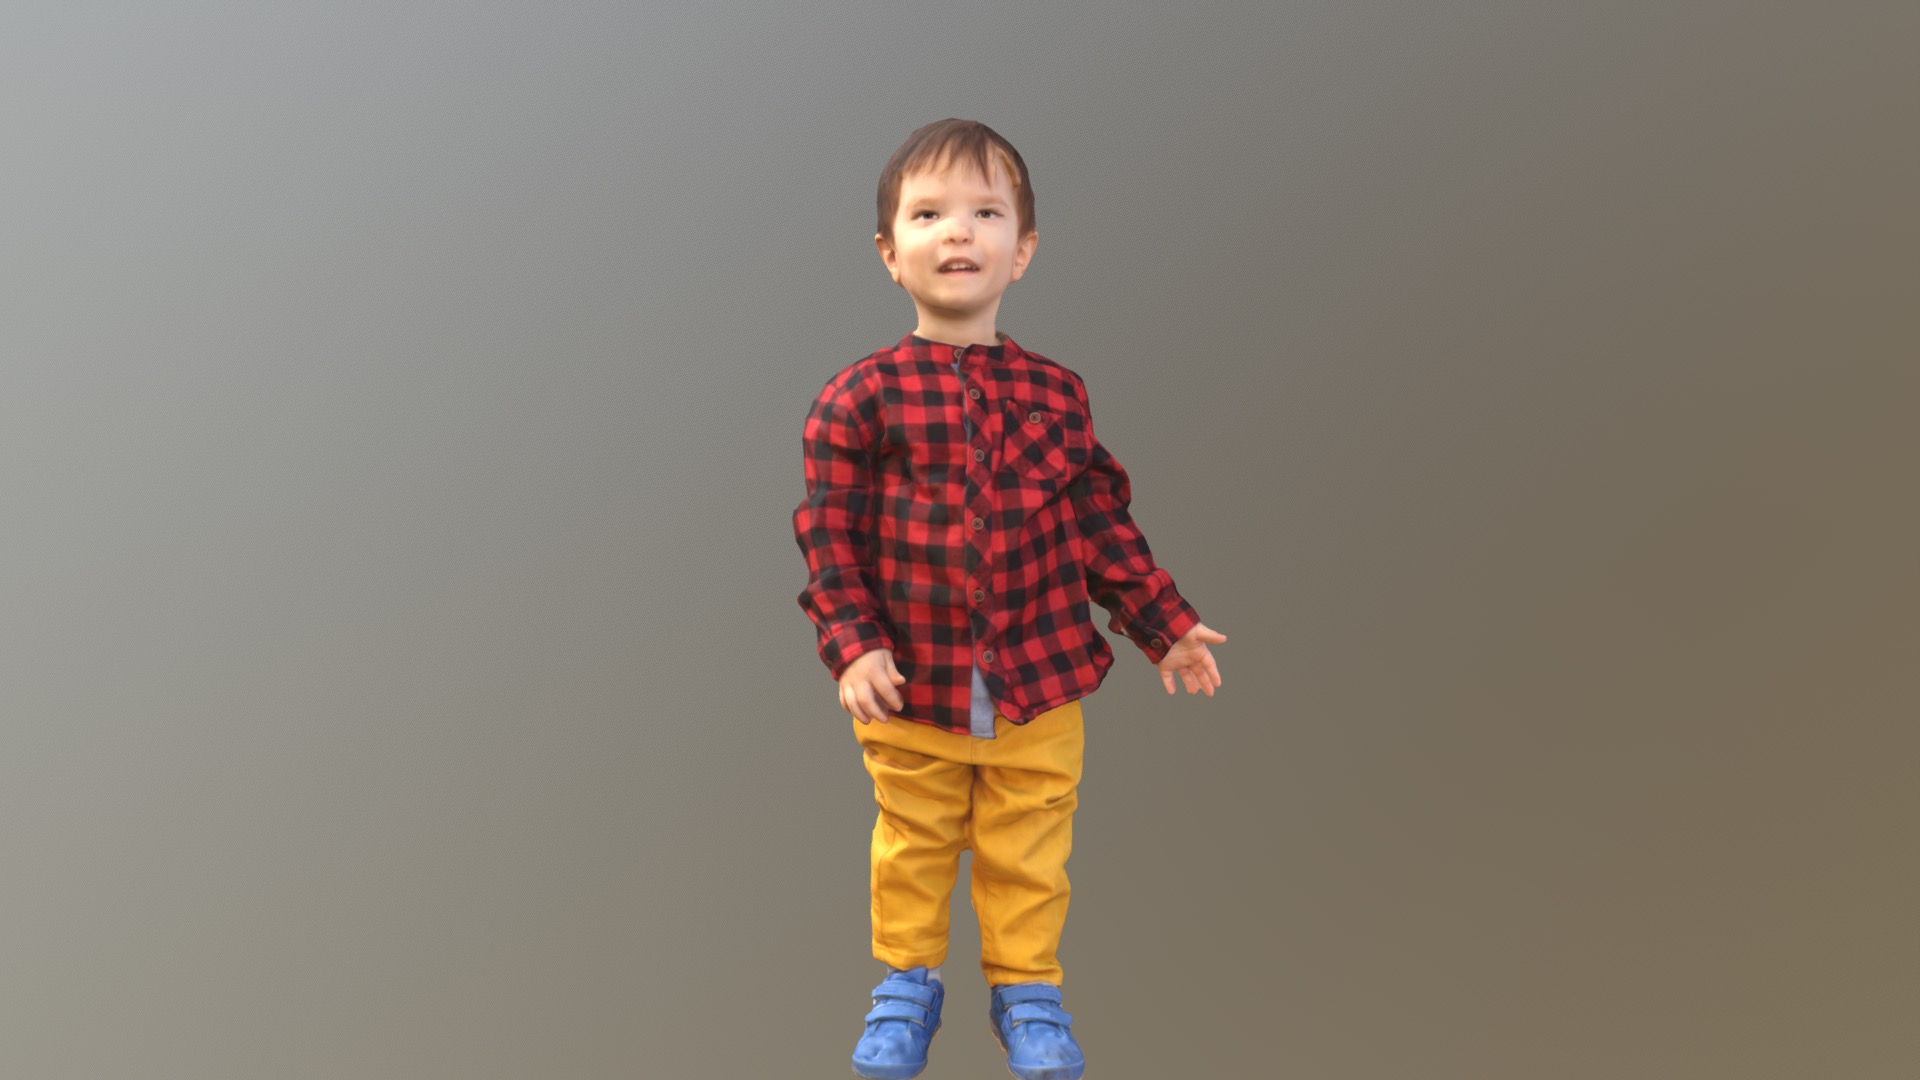 3D model Person 8 - This is a 3D model of the Person 8. The 3D model is about a child standing on a white background.